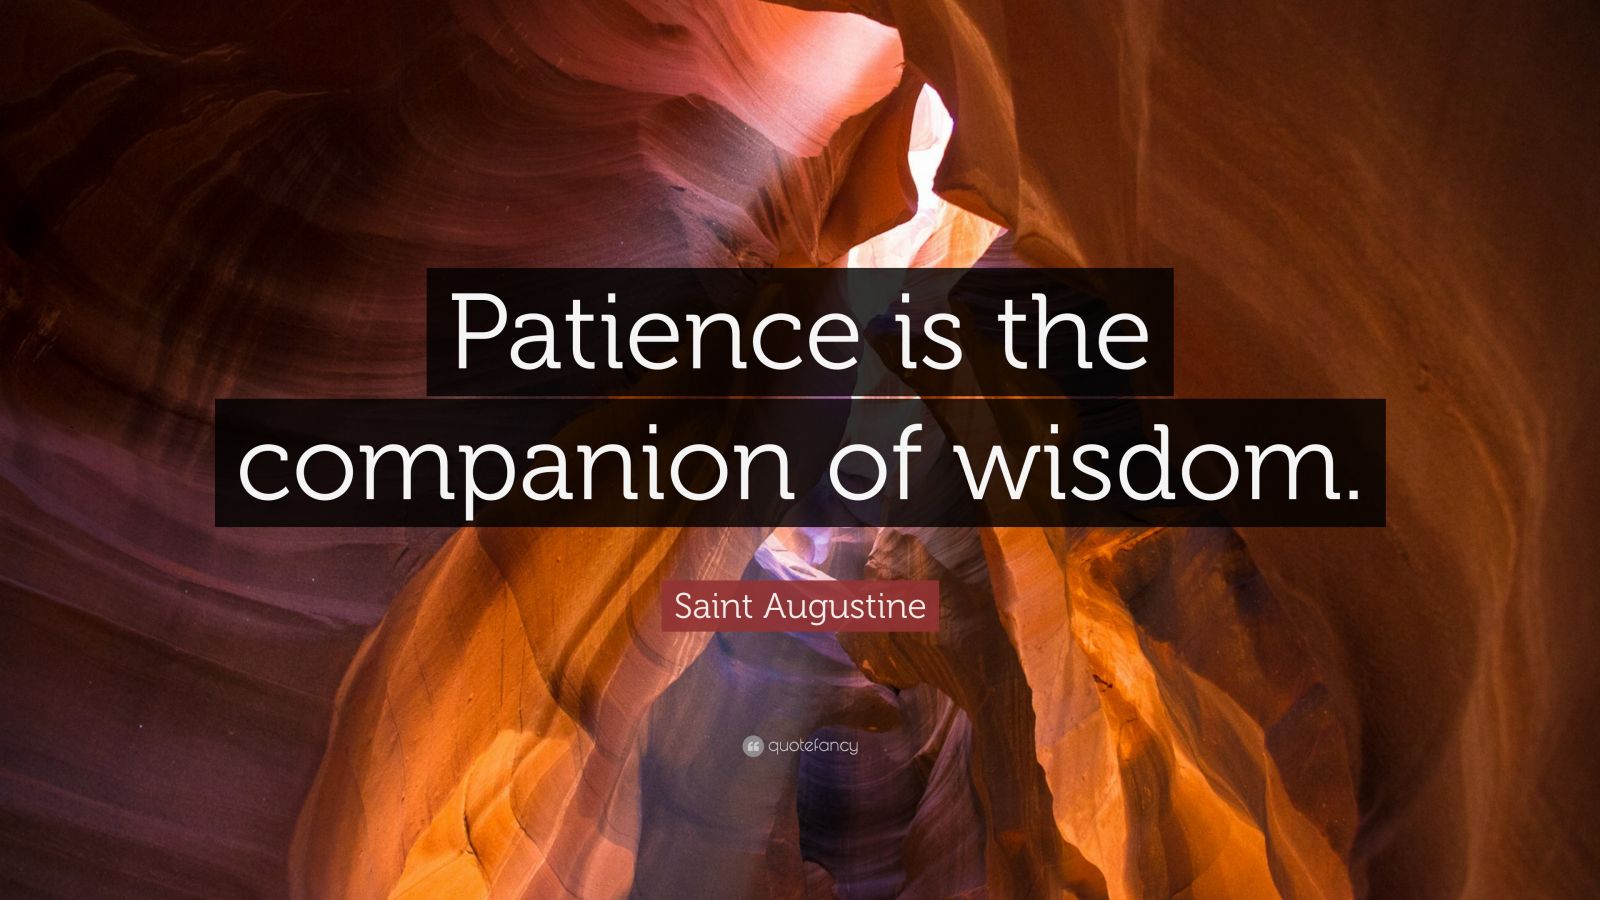 Saint Augustine Quote: “Patience is the companion of wisdom.” (23 ...